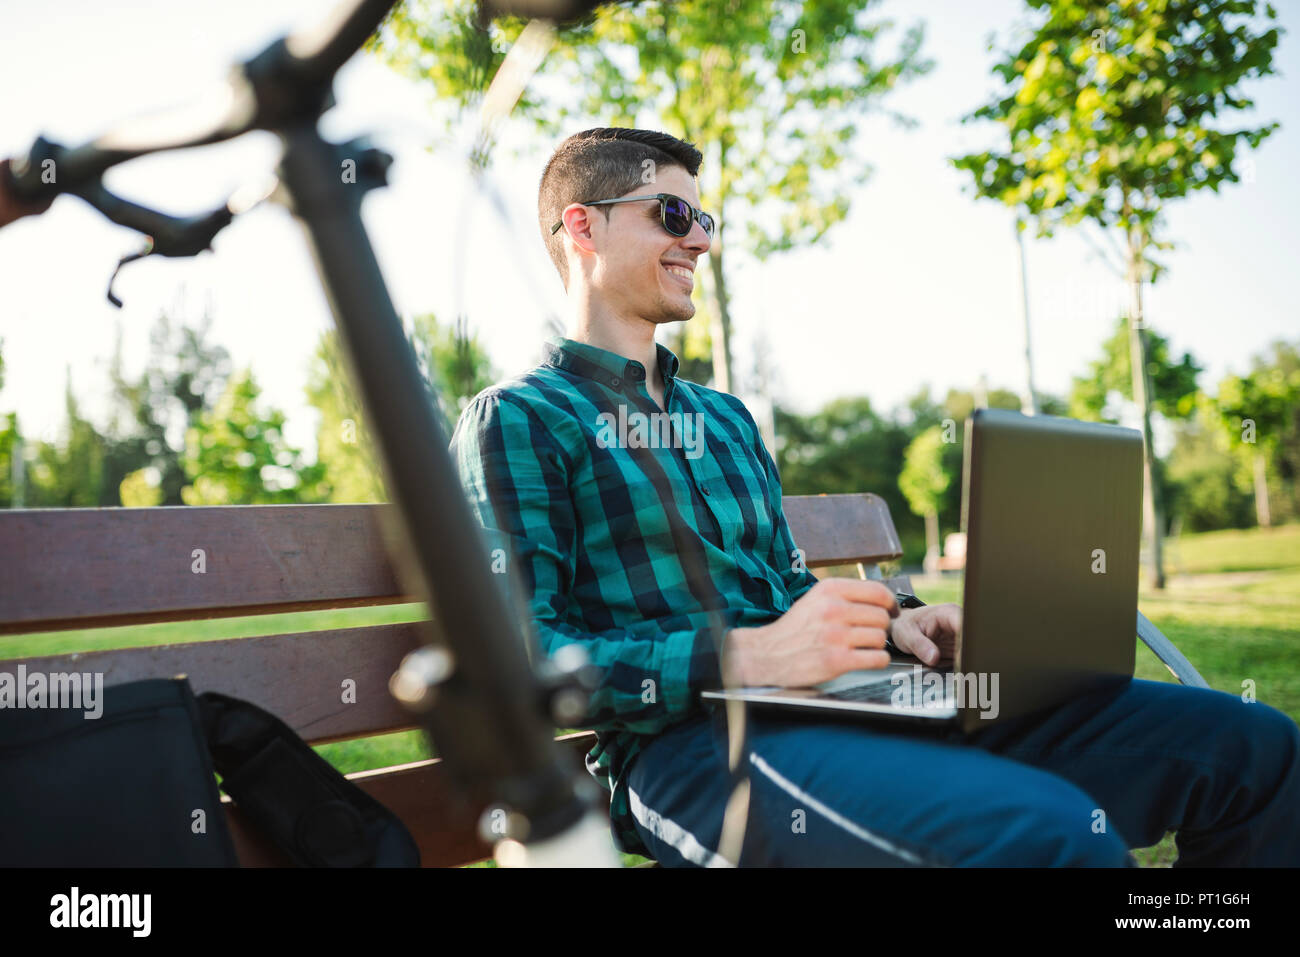 Young man with bicycle using laptop on park bench Stock Photo